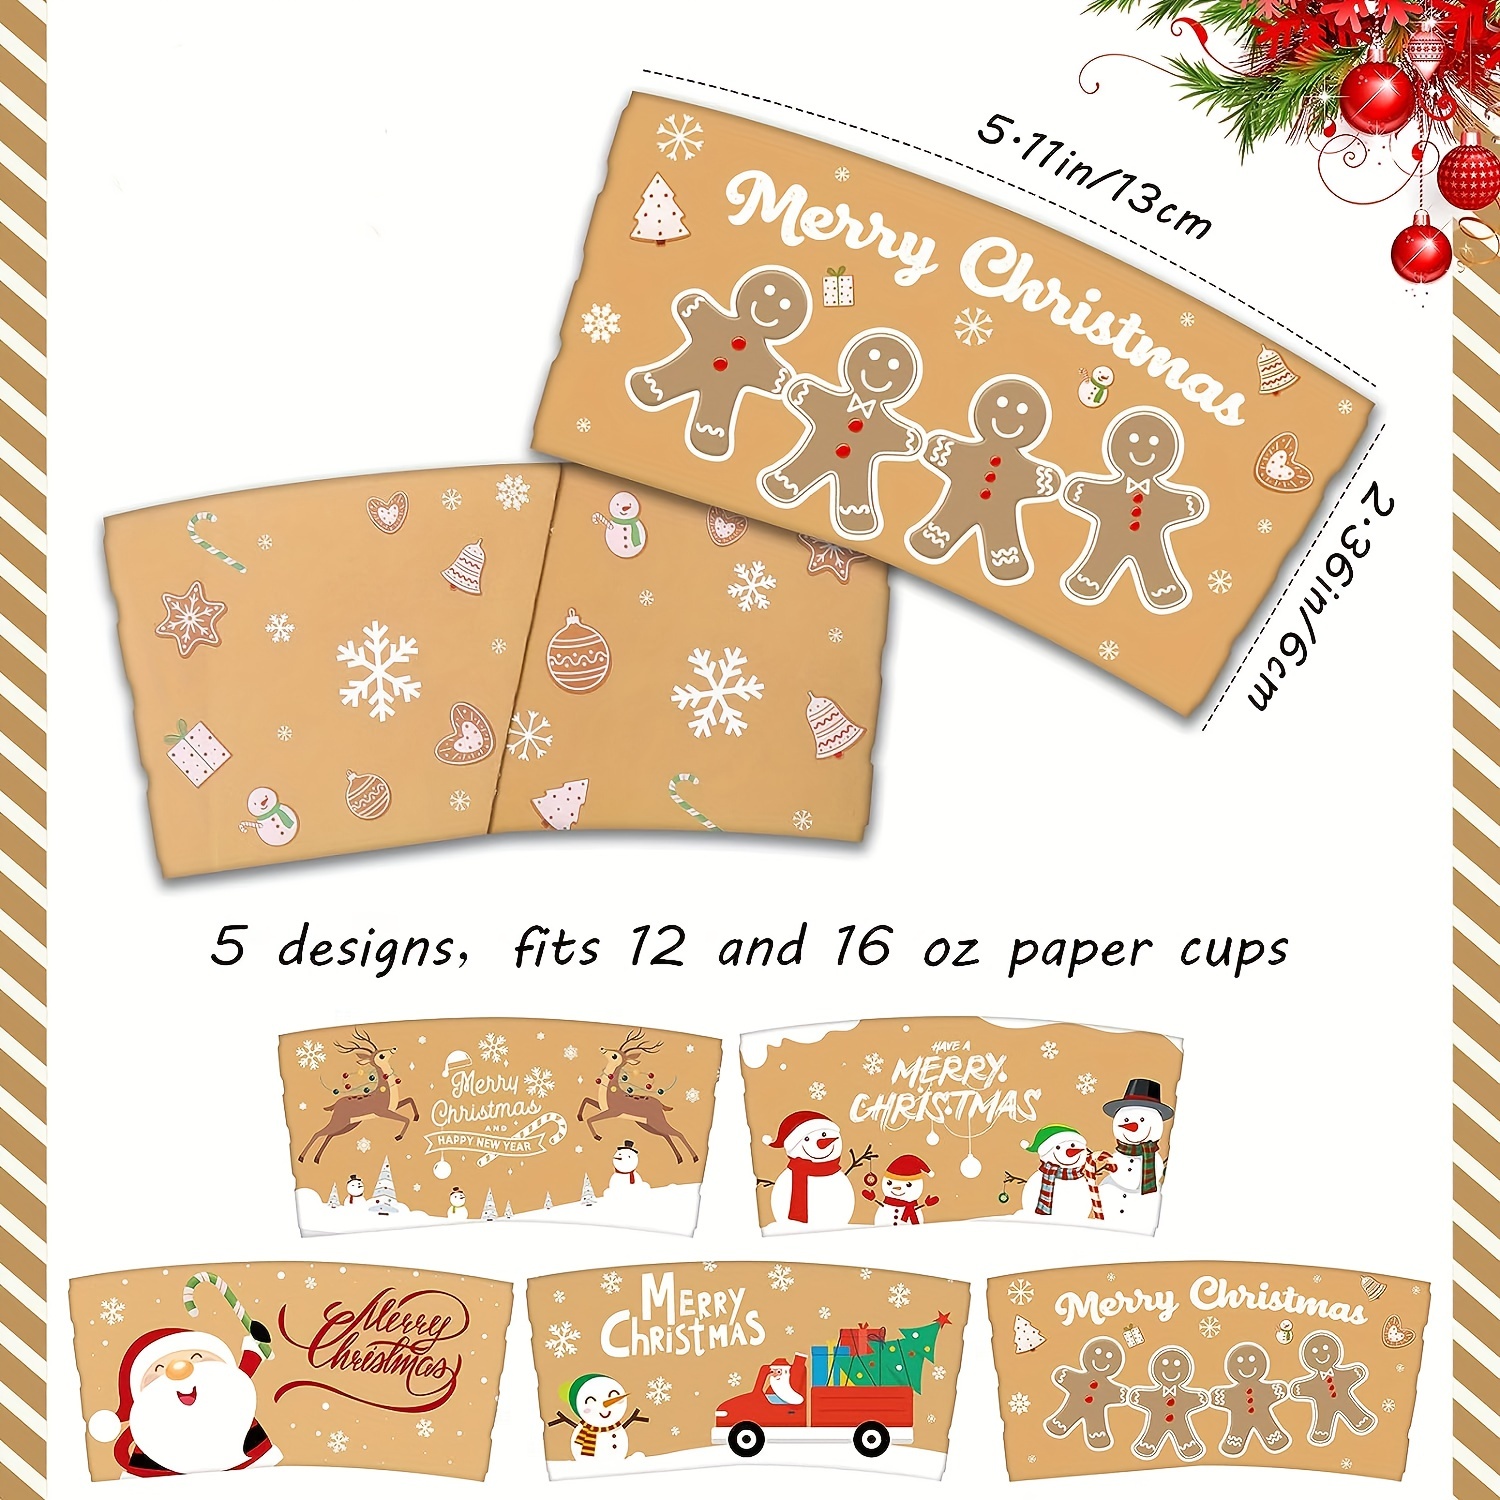 Paper Coffee Cups with Lids and Sleeves in 4 Christmas Designs (16